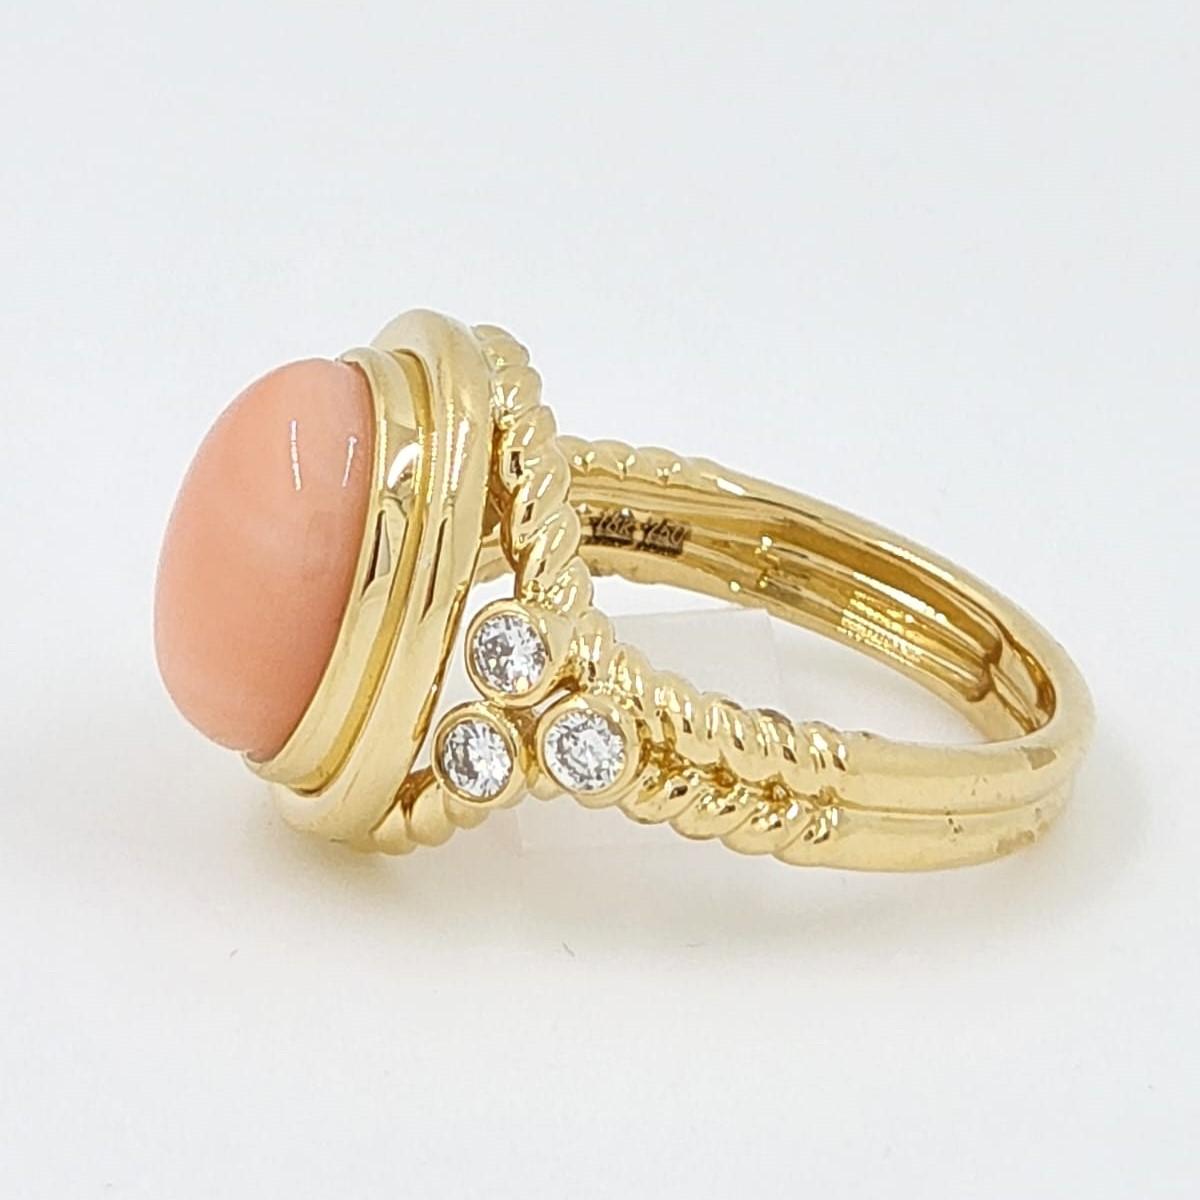 Modernist Coral with Diamonds Ring in 18K Yellow Gold